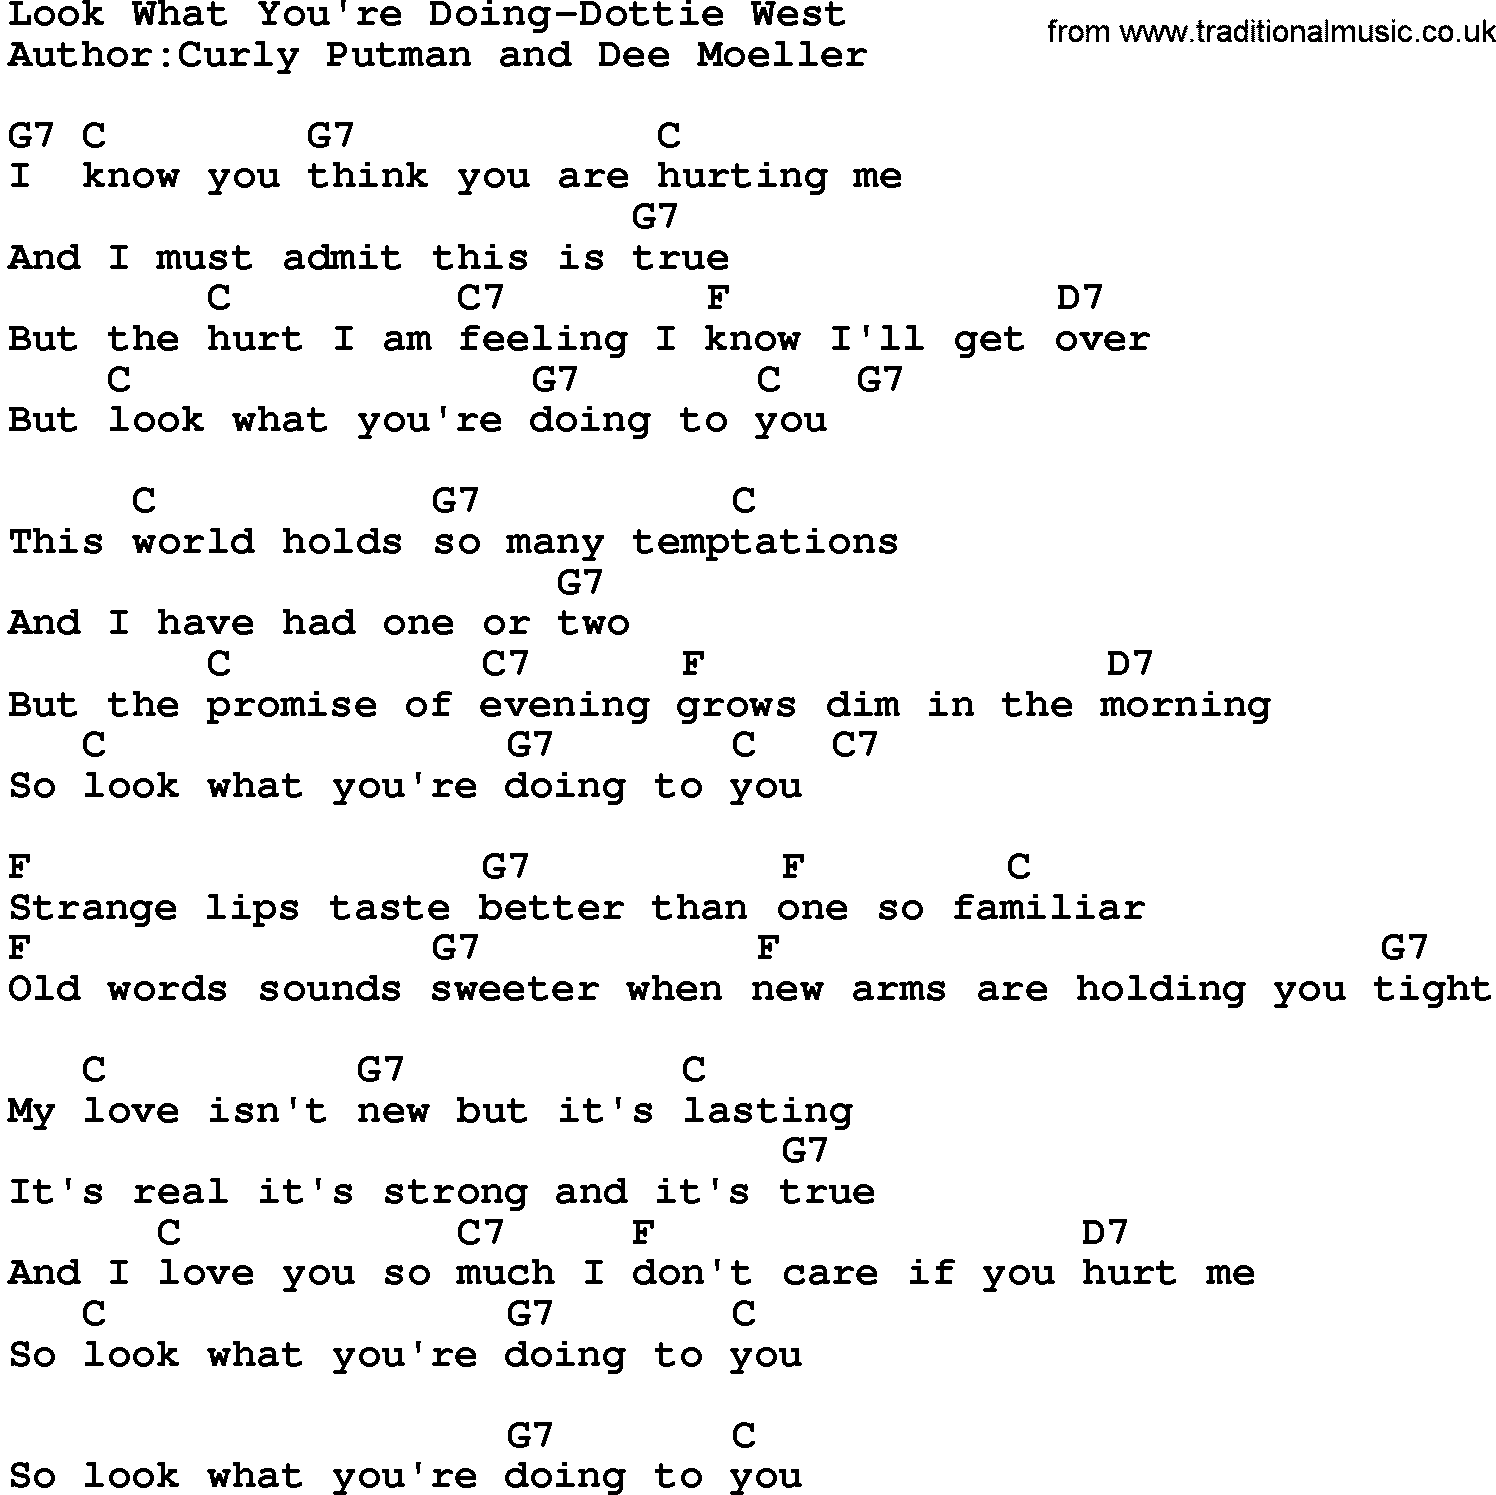 Country music song: Look What You're Doing-Dottie West lyrics and chords